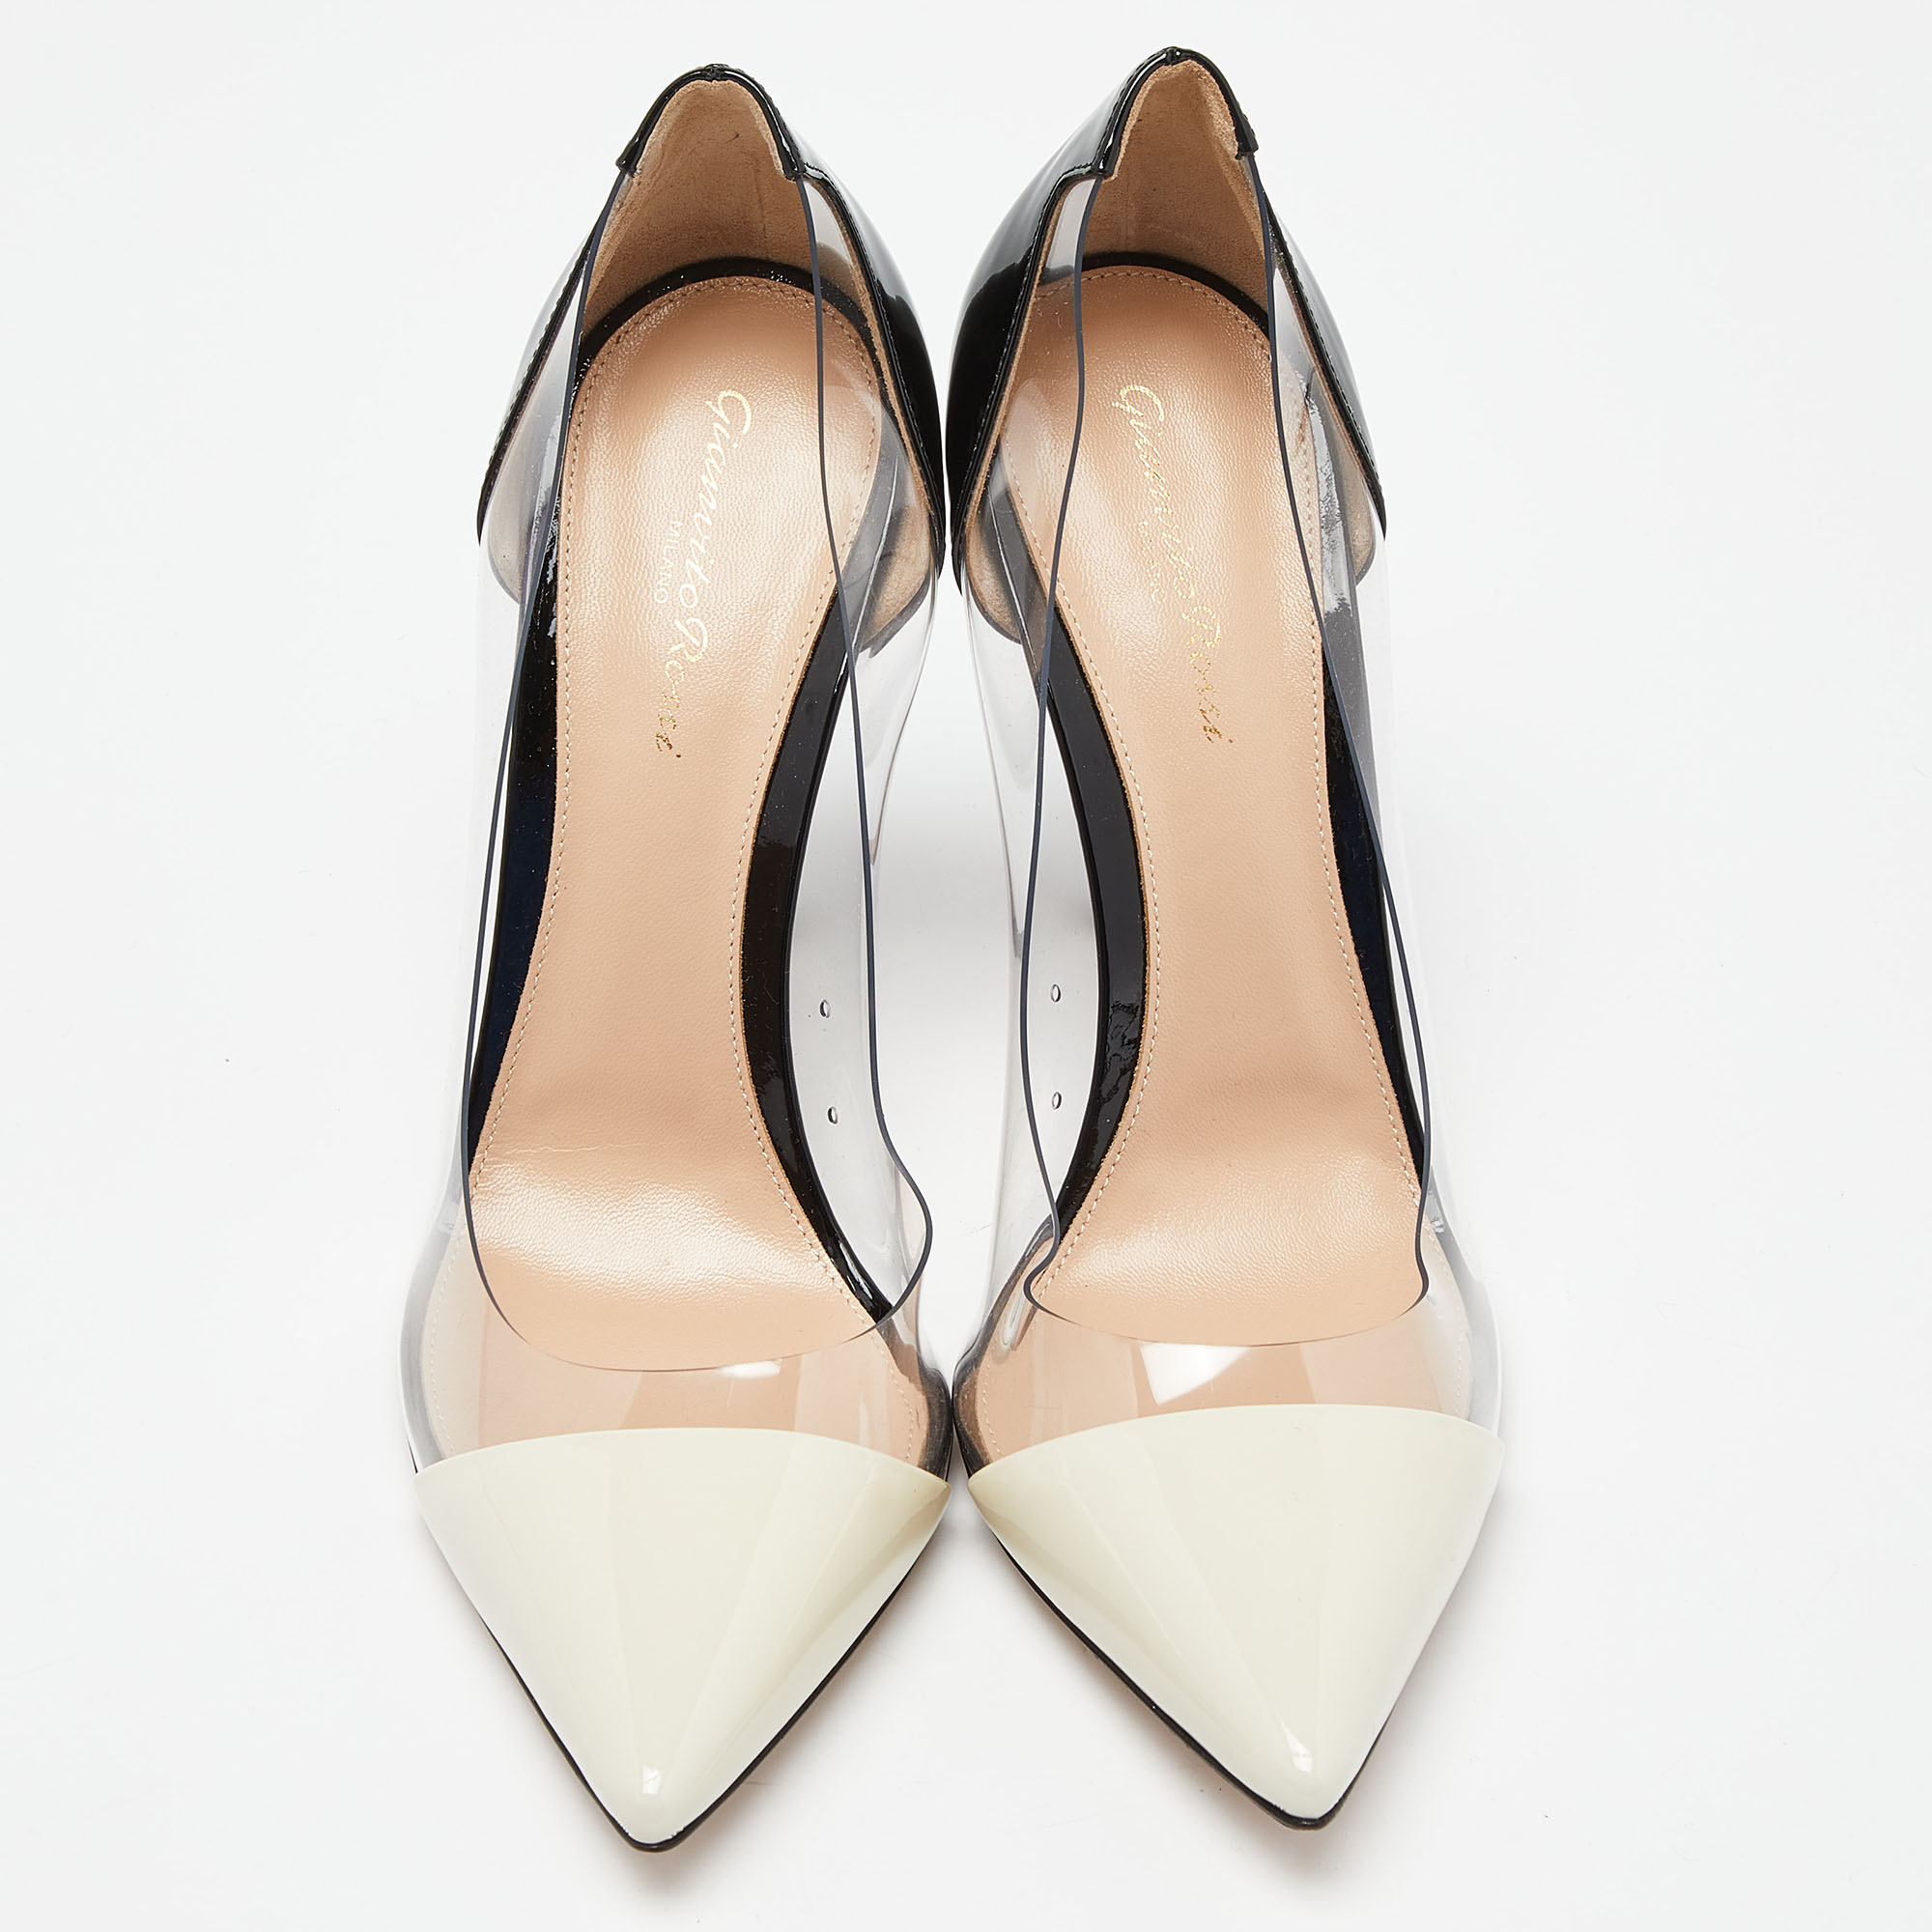 Gianvito Rossi White/Black Patent Leather And PVC Plexi Pointed Toe Pumps Size 40